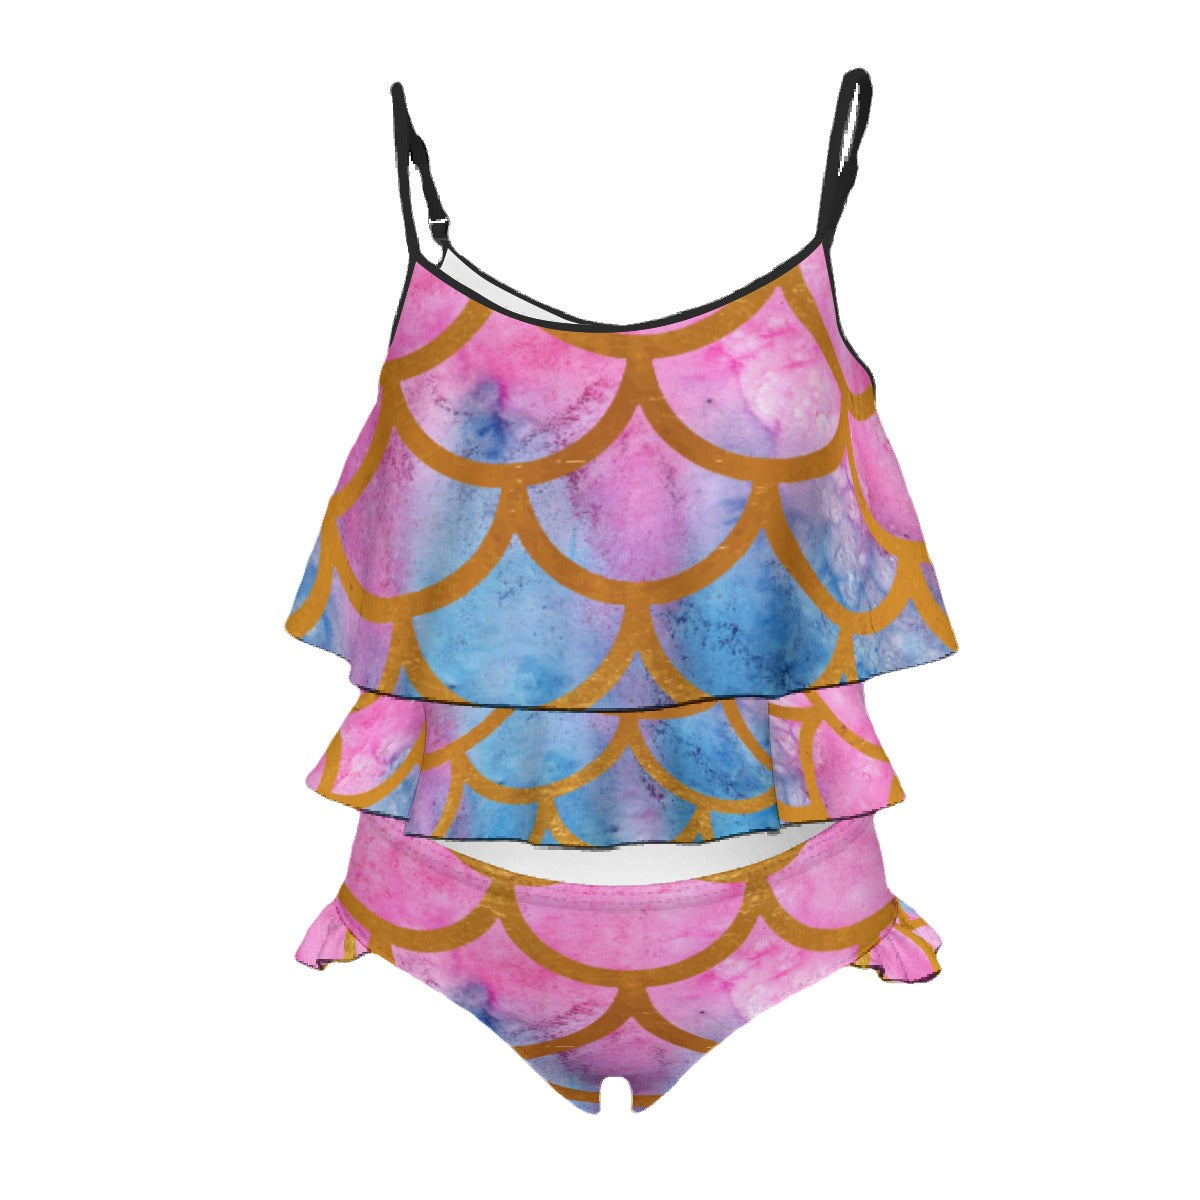 All-Over Print Kid's Swimsuit